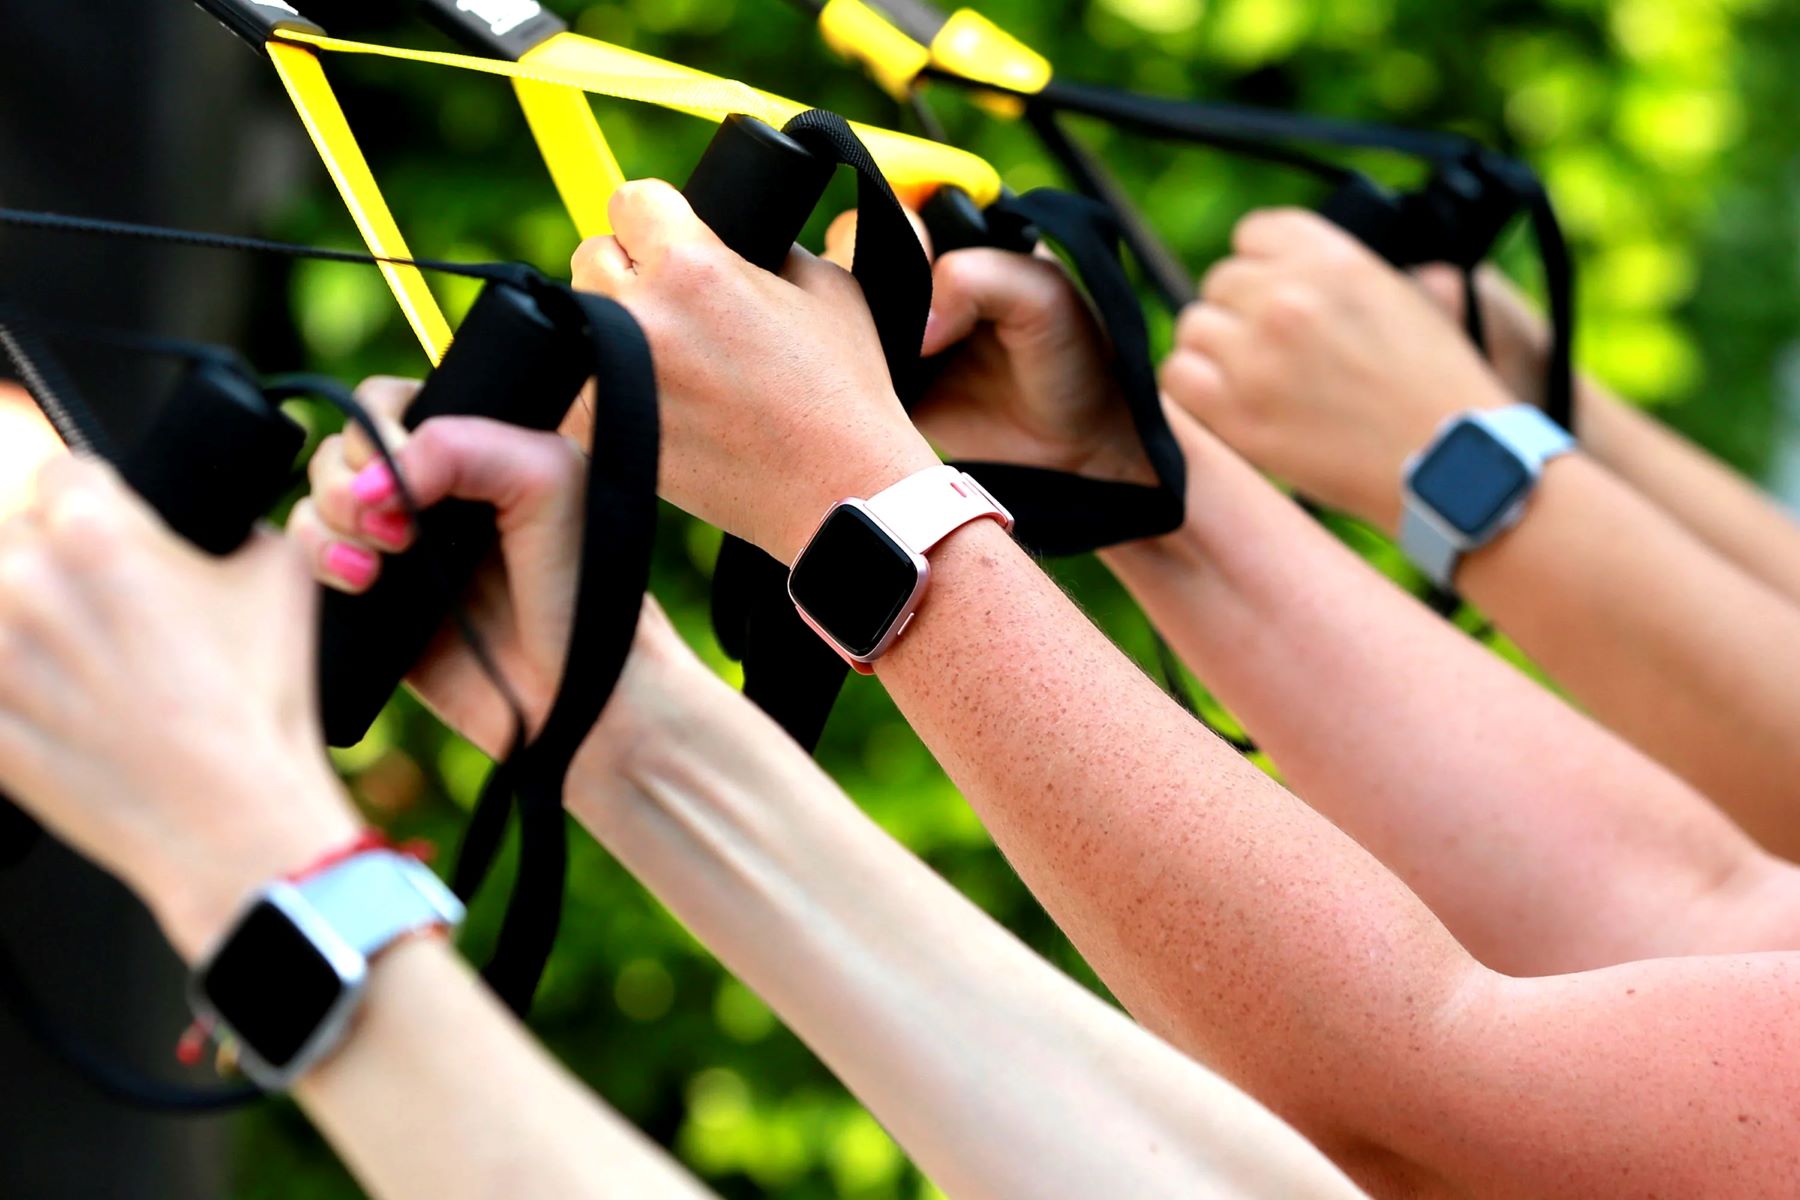 How To Control A Fitness Tracker